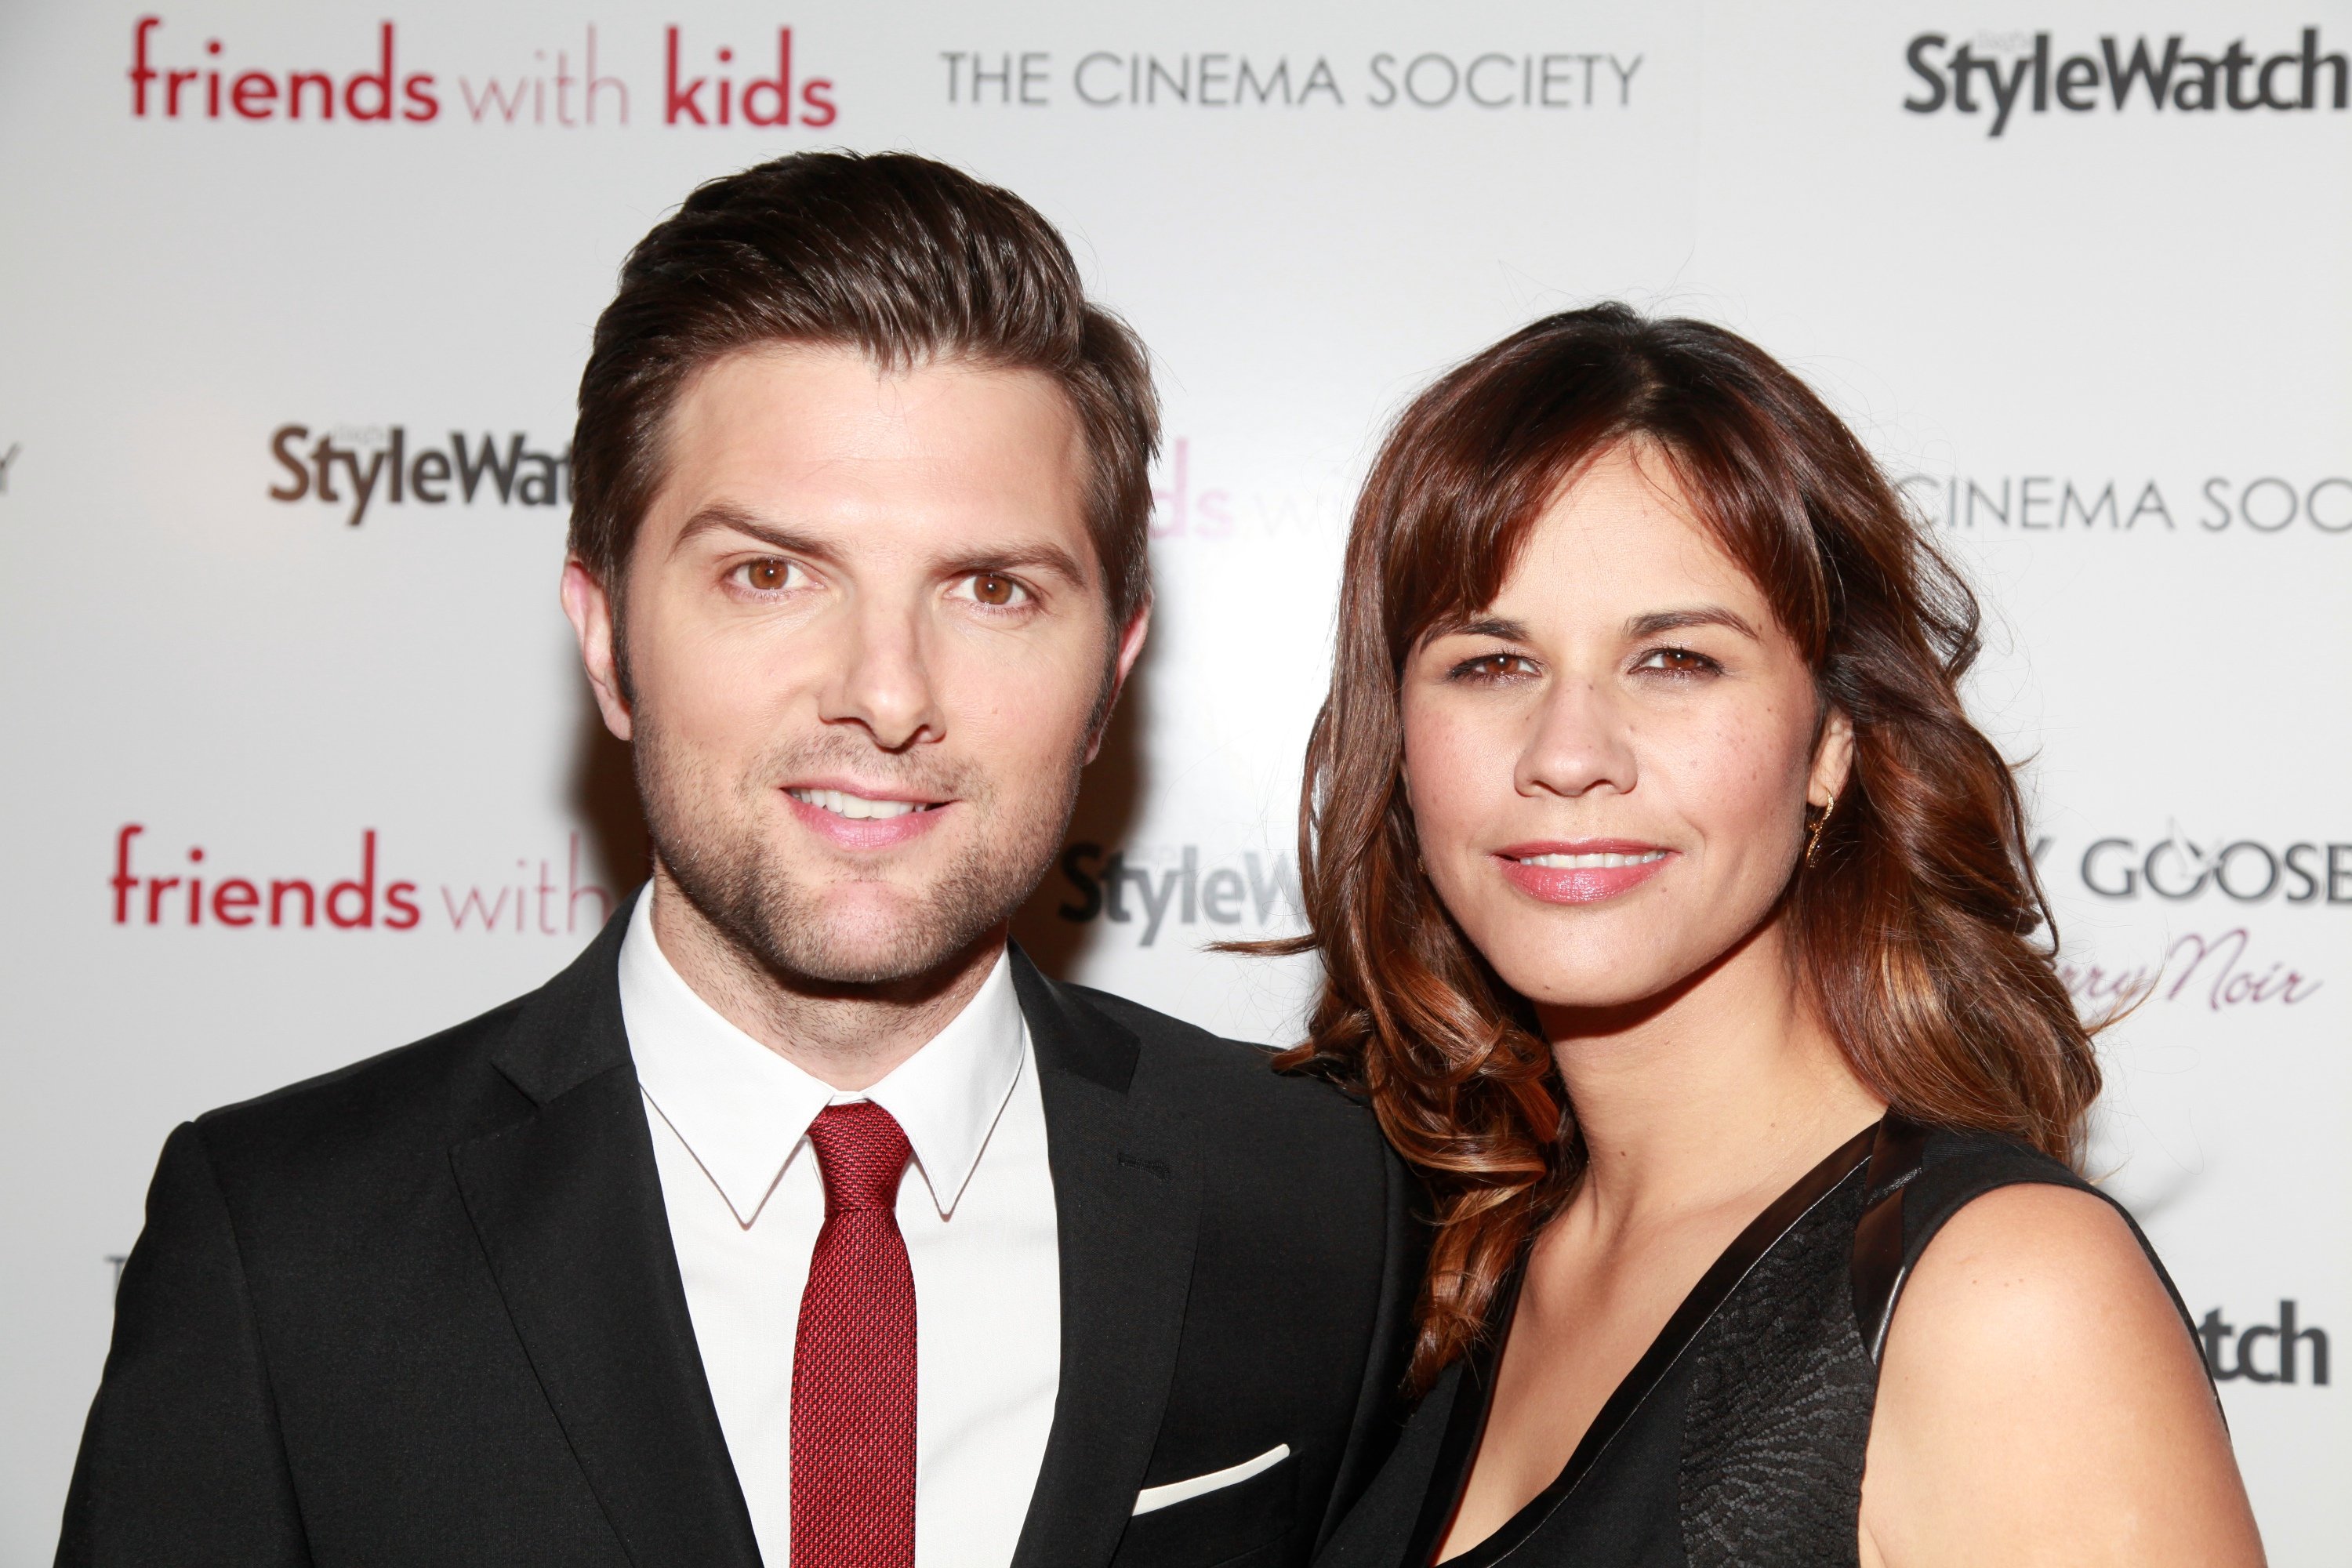 Adam Scott and Naomi Sablan at the SVA Theater screening of "Friends With Kids" on March 5, 2012 in New York City. | Source: Getty Images